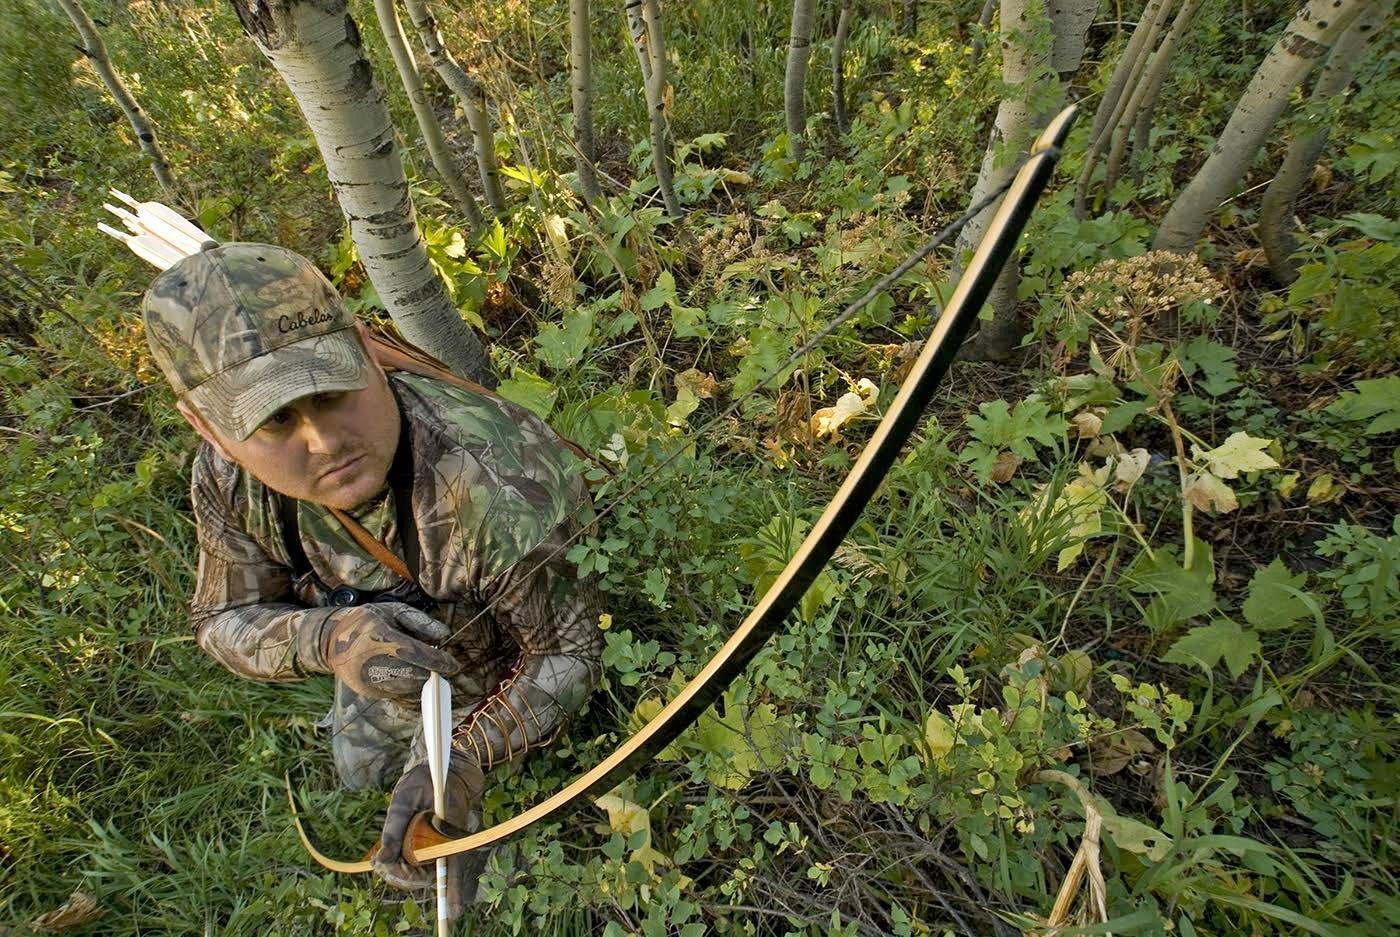 Neighbors want man to stop hunting on his own property with a longbow. (Photo by John Hafner)